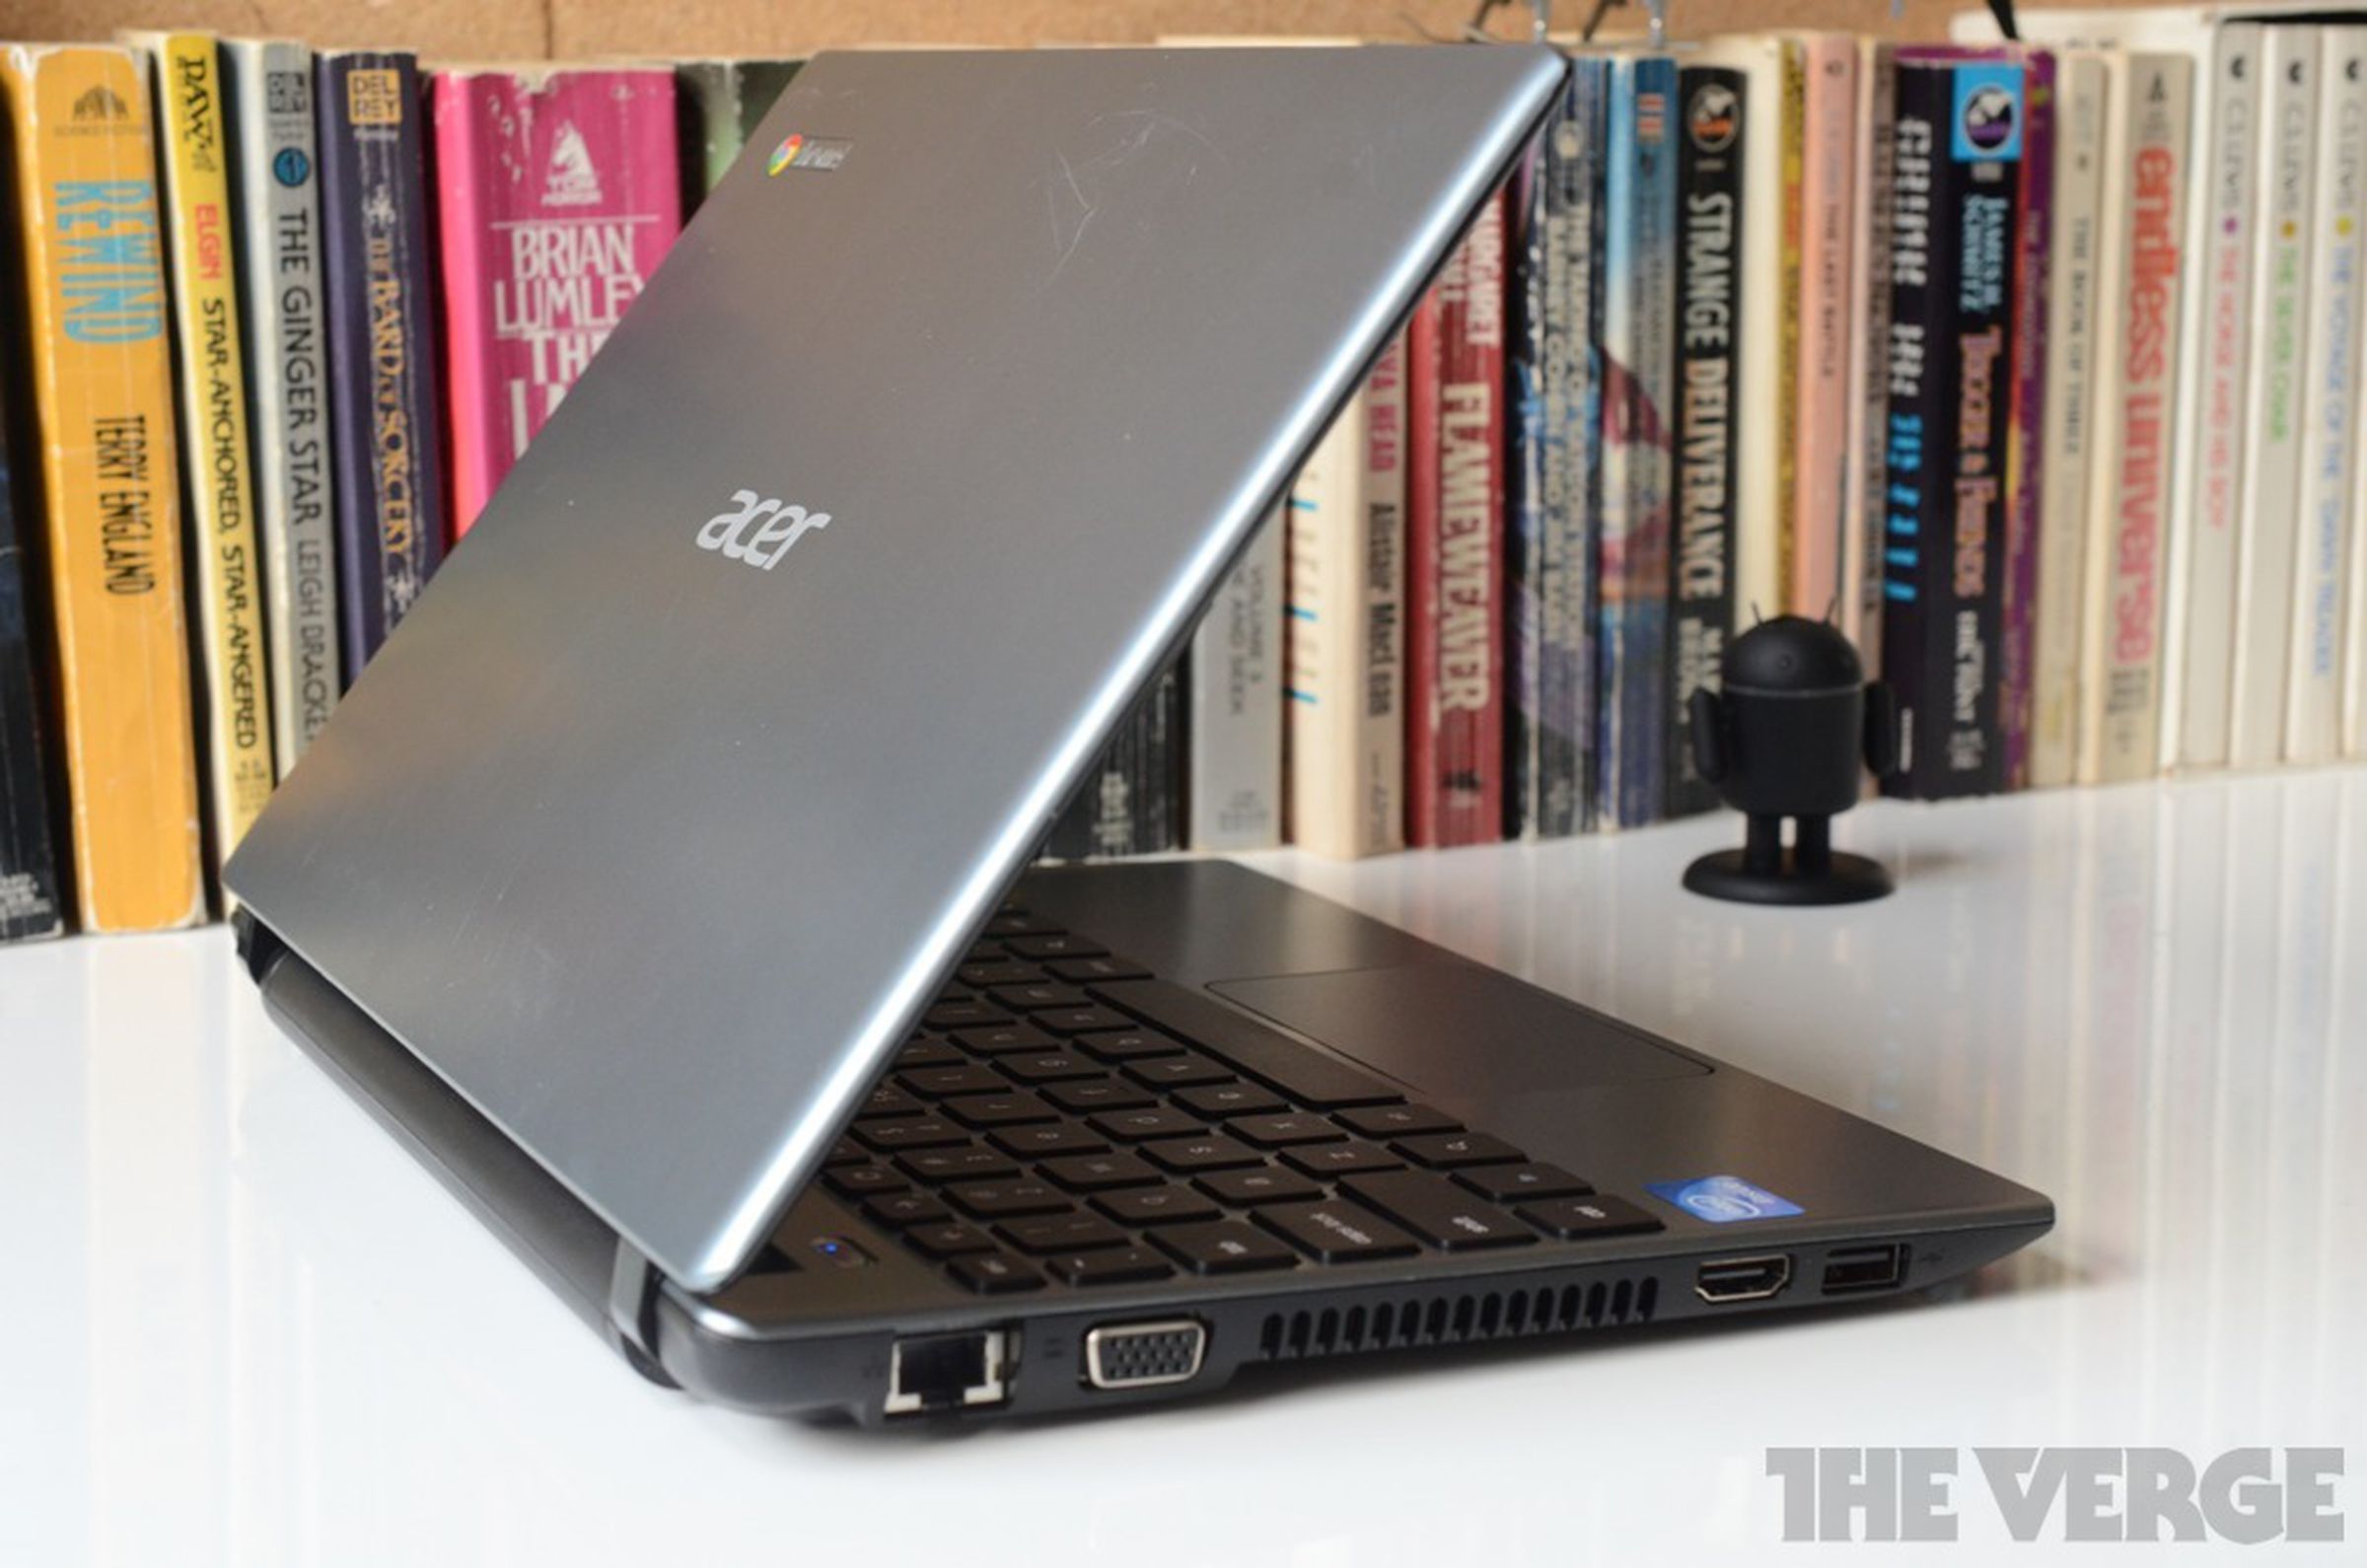 Acer C7 Chromebook pictures